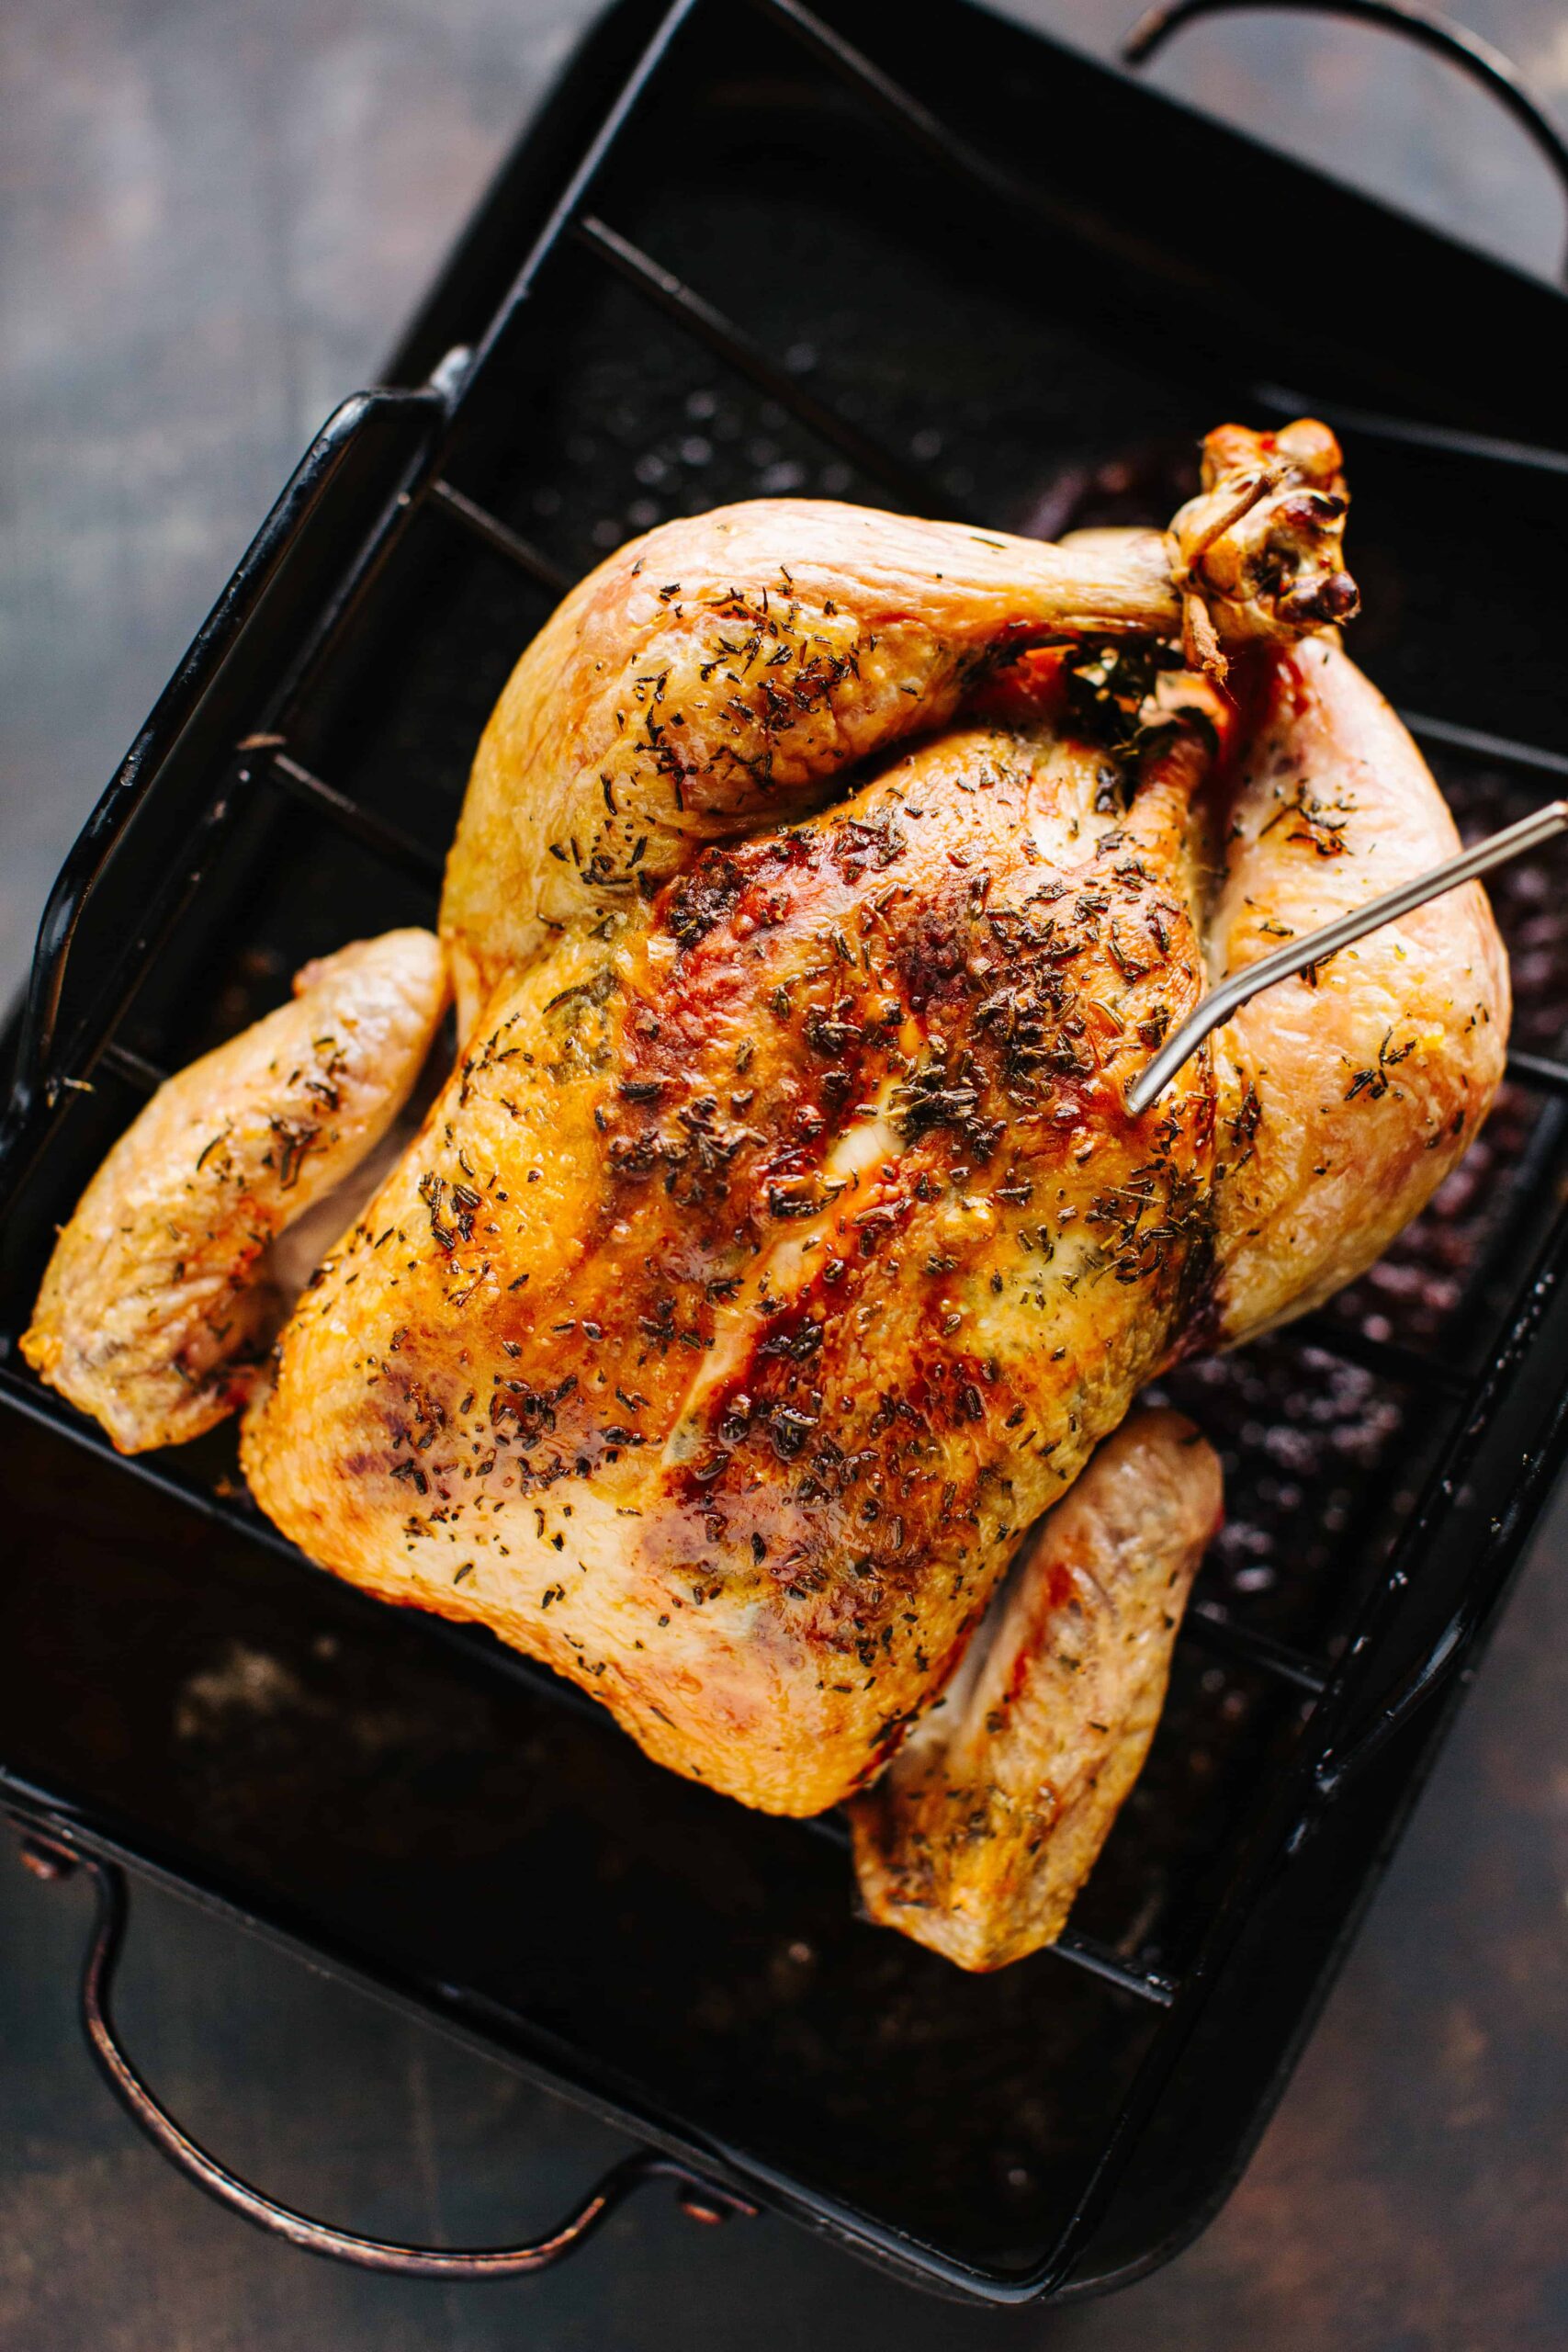 https://coleycooks.com/wp-content/uploads/2015/10/Whole-Roasted-Chicken-with-Herbs-4-scaled.jpg